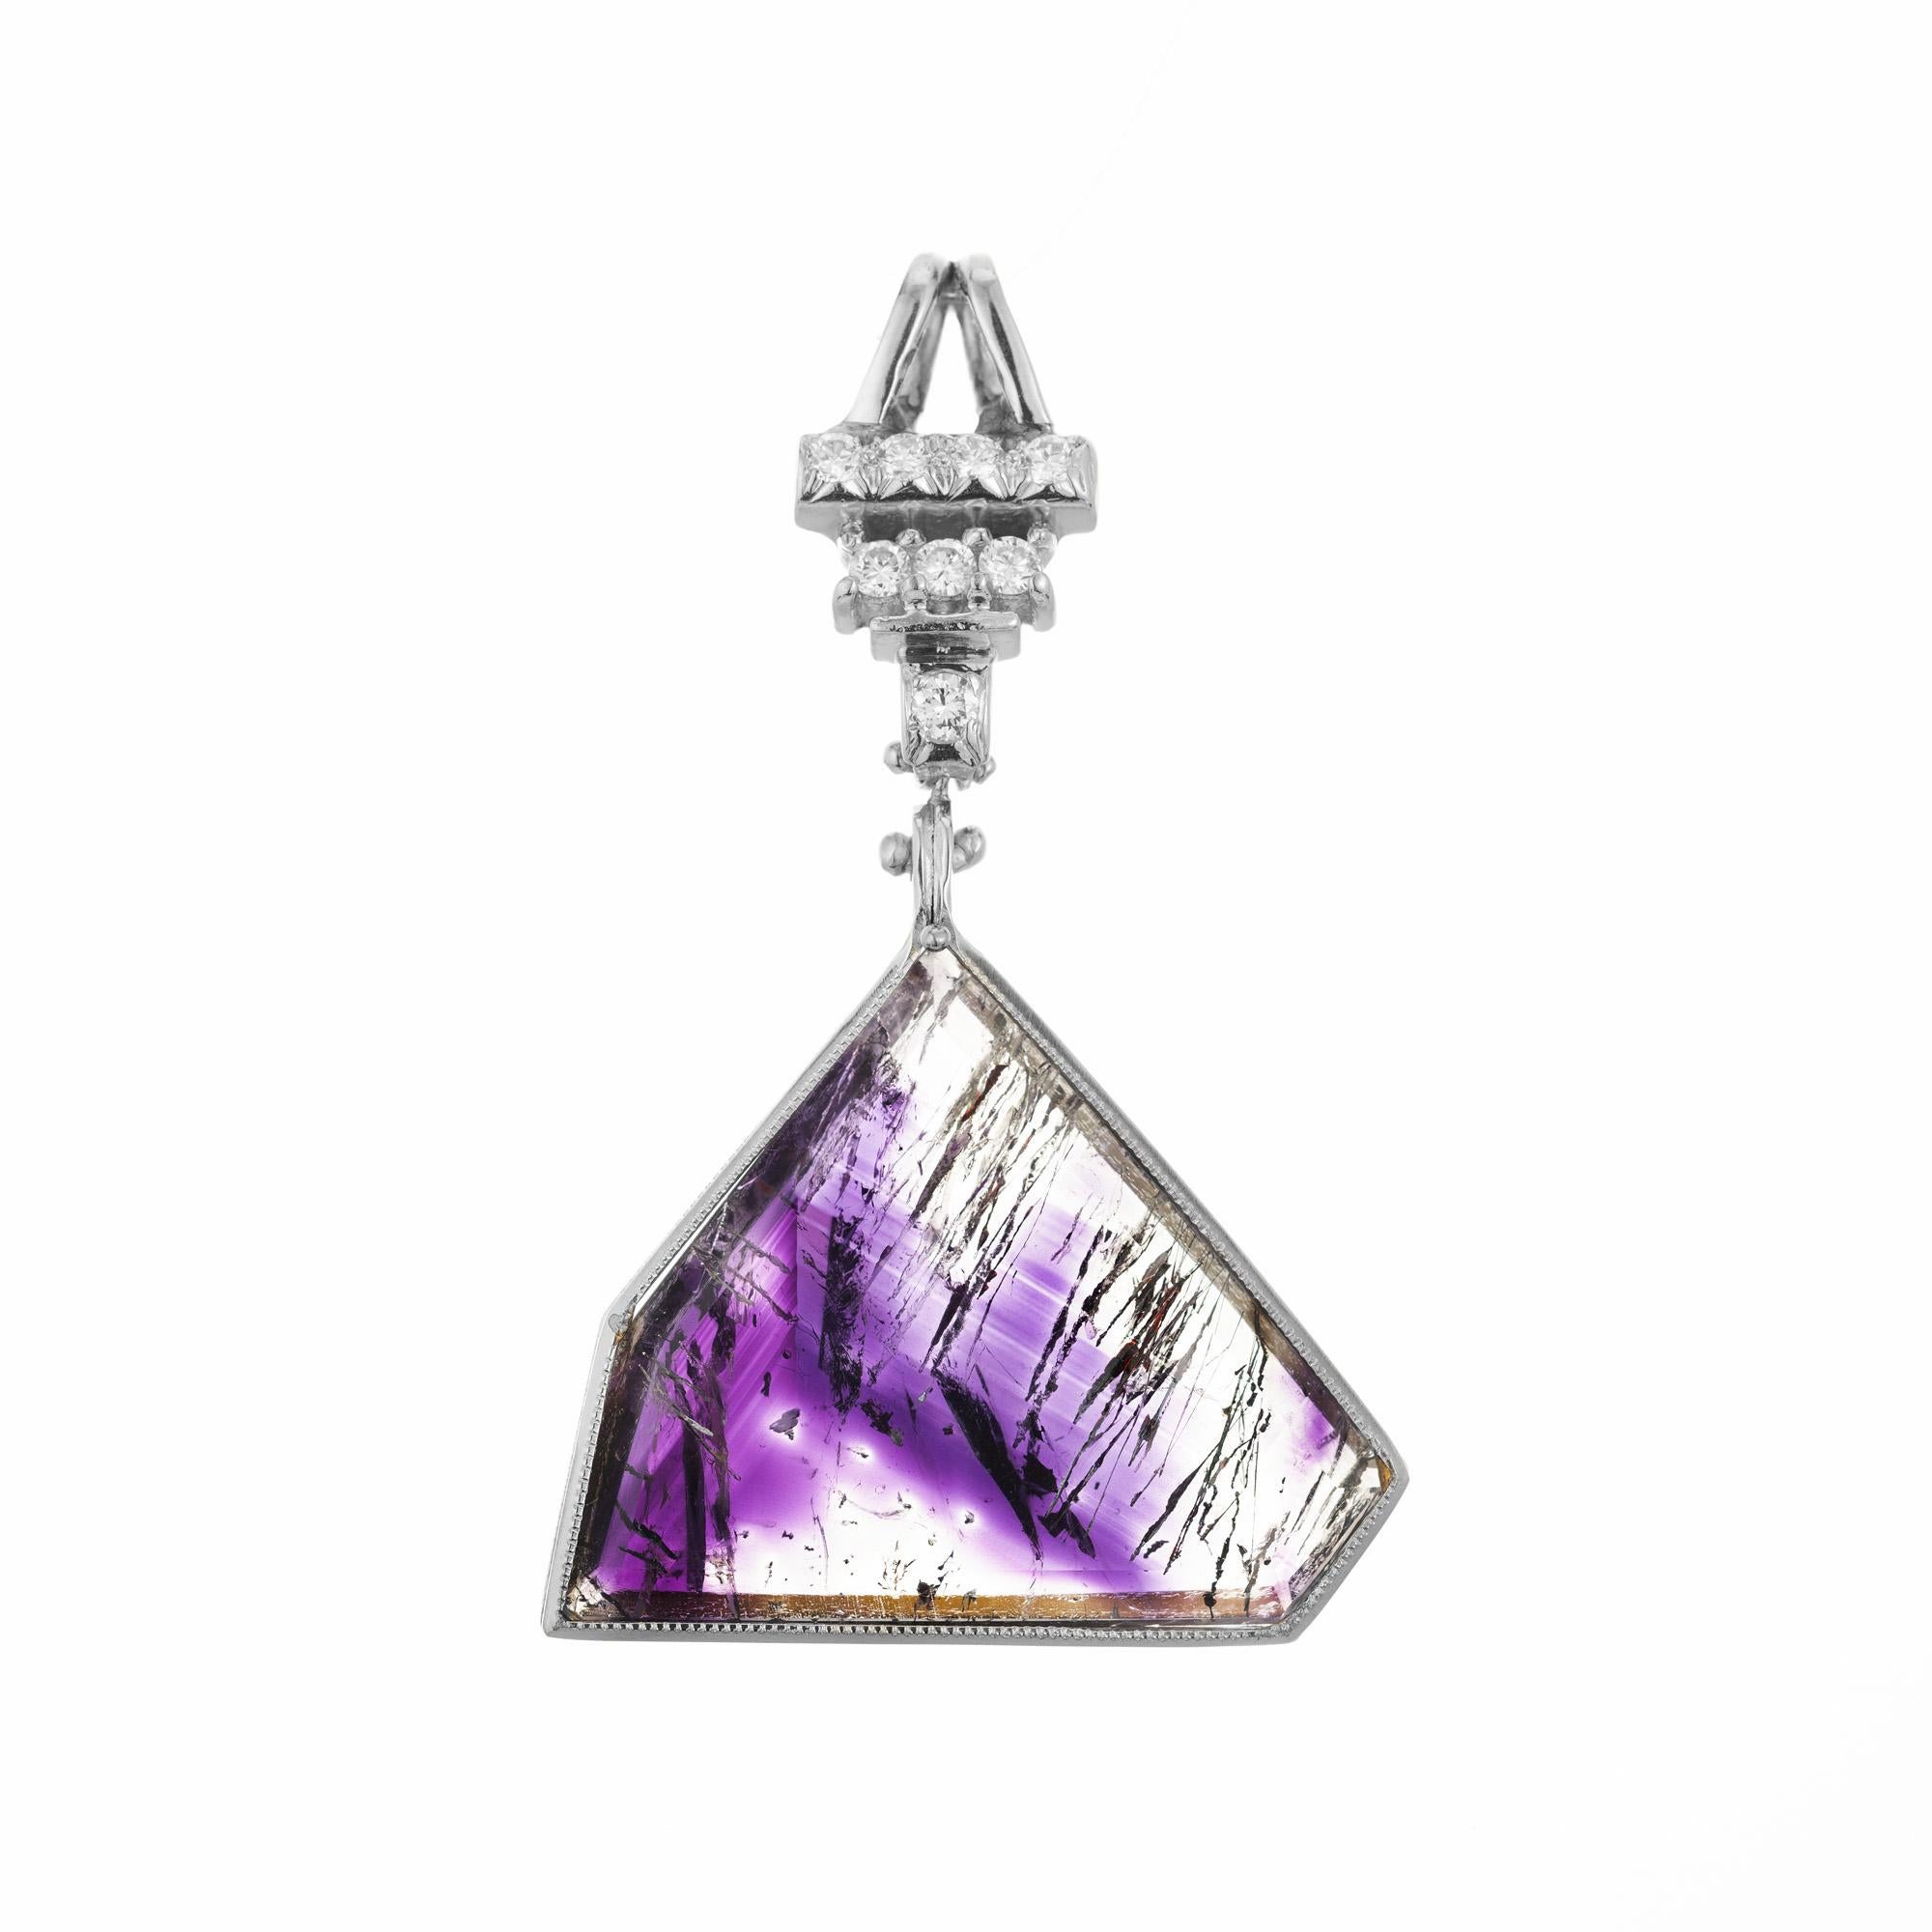 The center piece of the this pendant is the unique and rare 16.31ct Geothite quartz amethyst. Natural and untreated quartz. It has sections of pure clear quartz crystal and distinct areas of bright deep purple quartz, more commonly known as